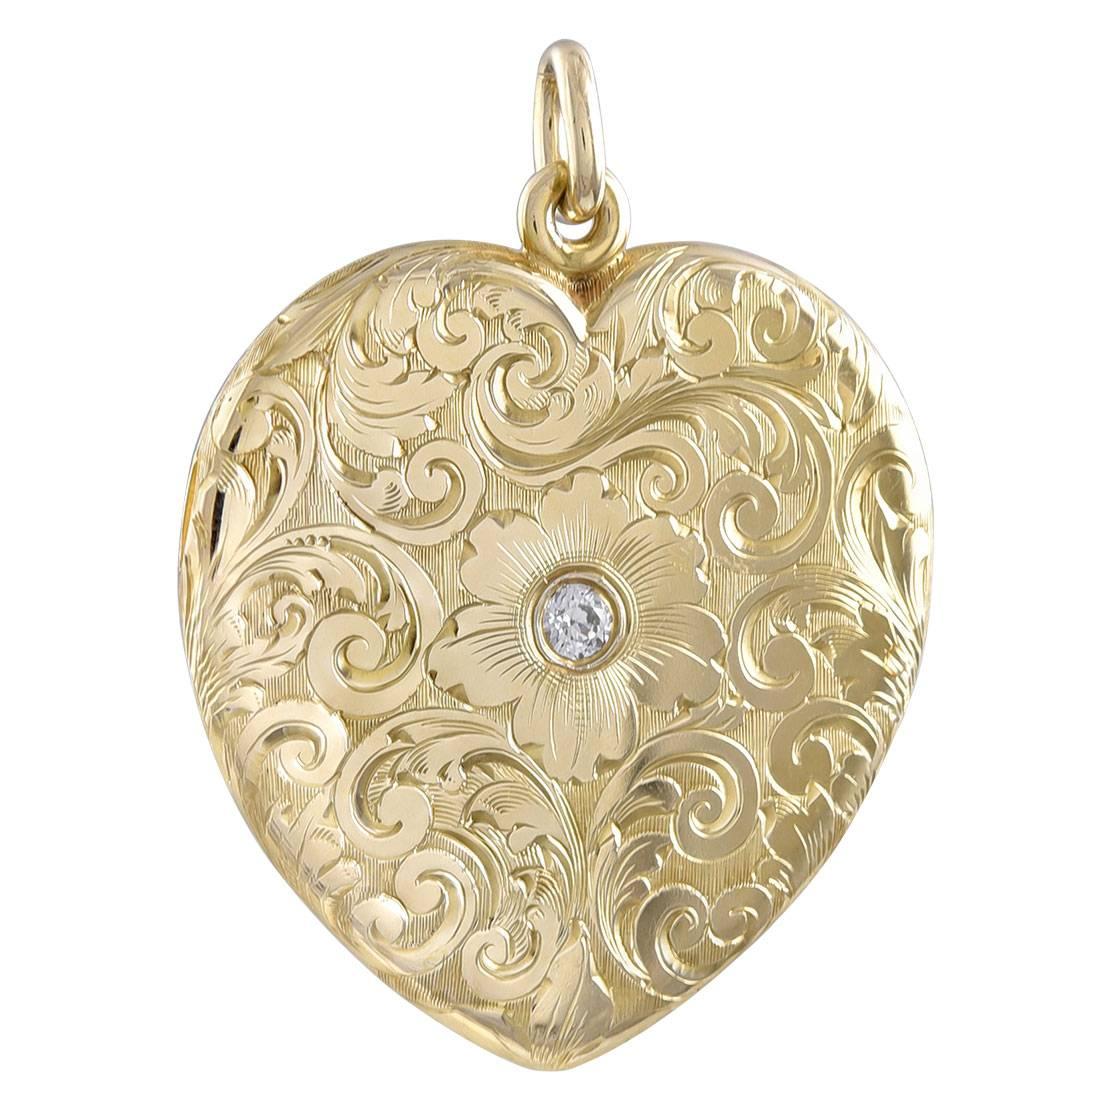 Absolutely Beautiful Antique Gold Heart Locket